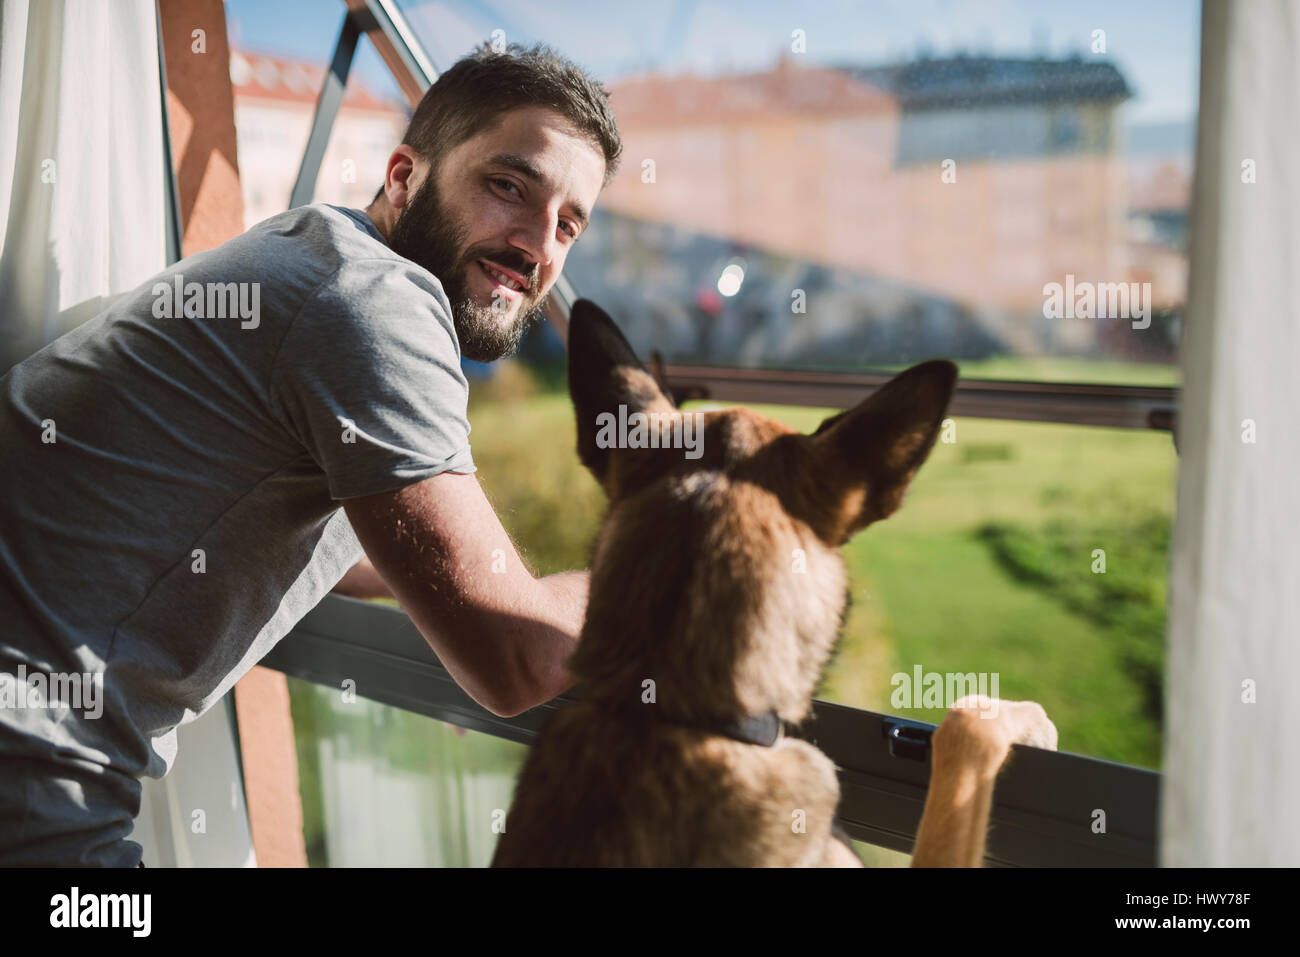 Young man standing at window with his dog, waiting Stock Photo